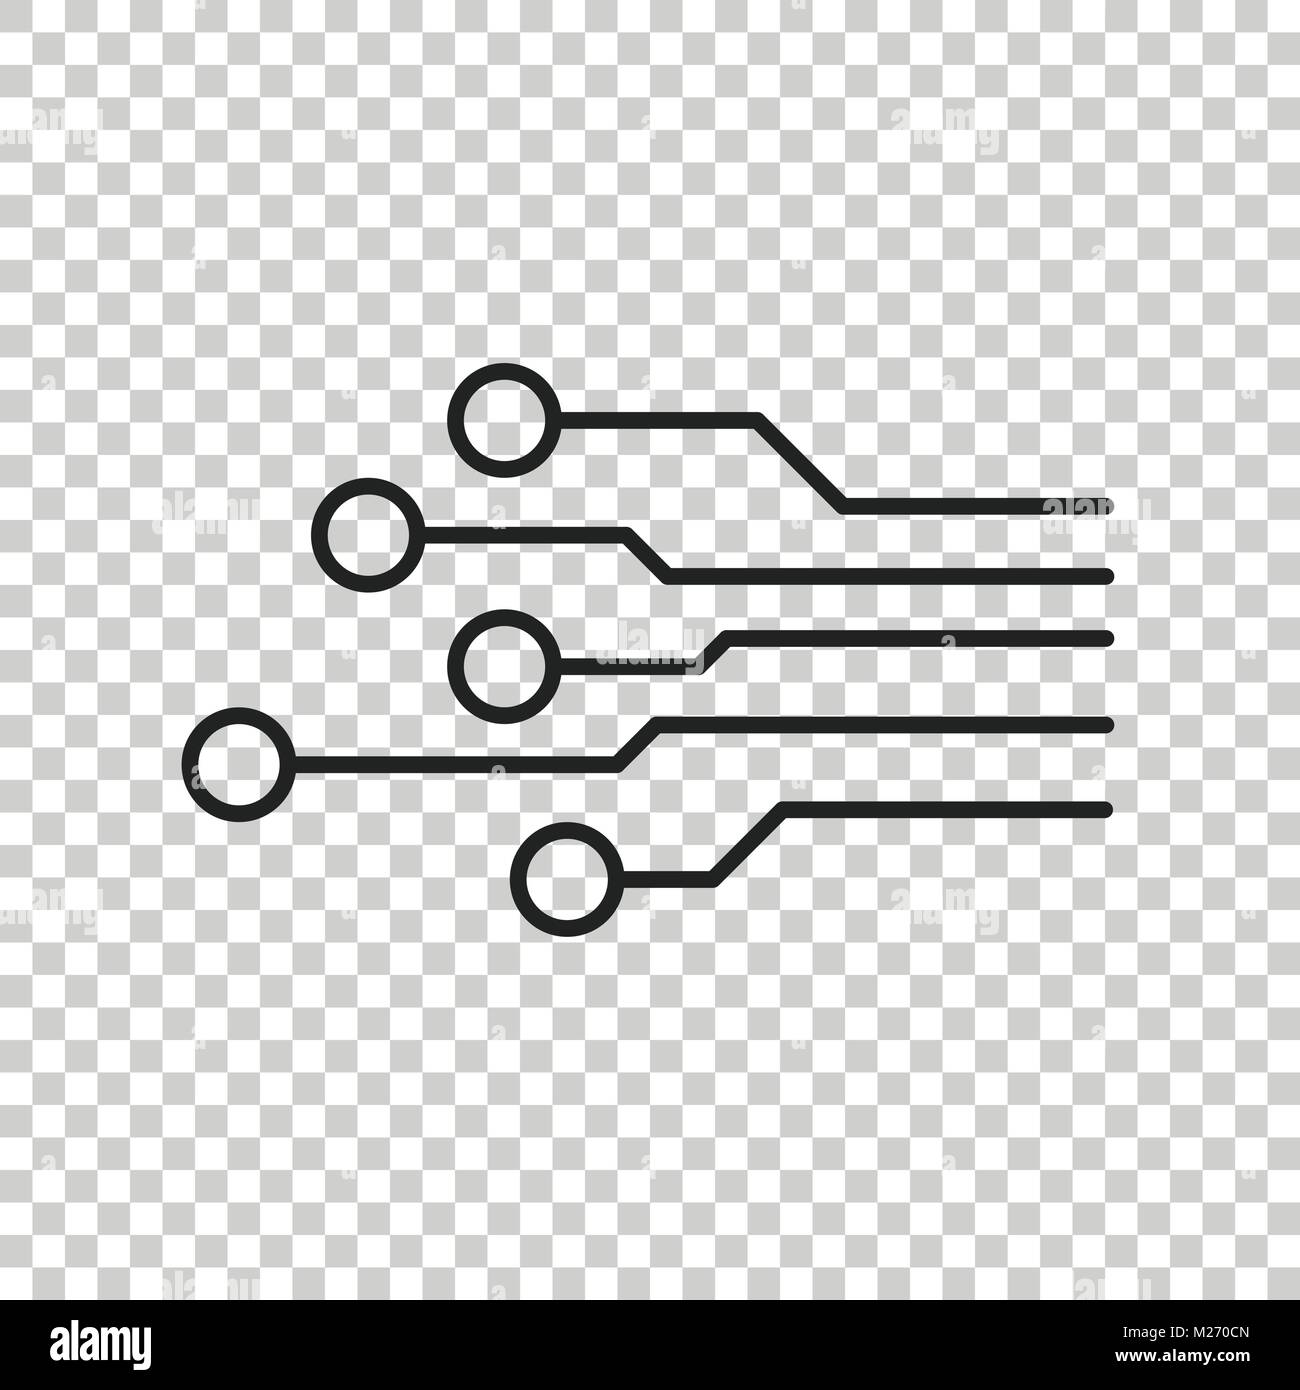 Circuit board icon. Technology scheme symbol flat vector illustration on isolated background. Stock Vector